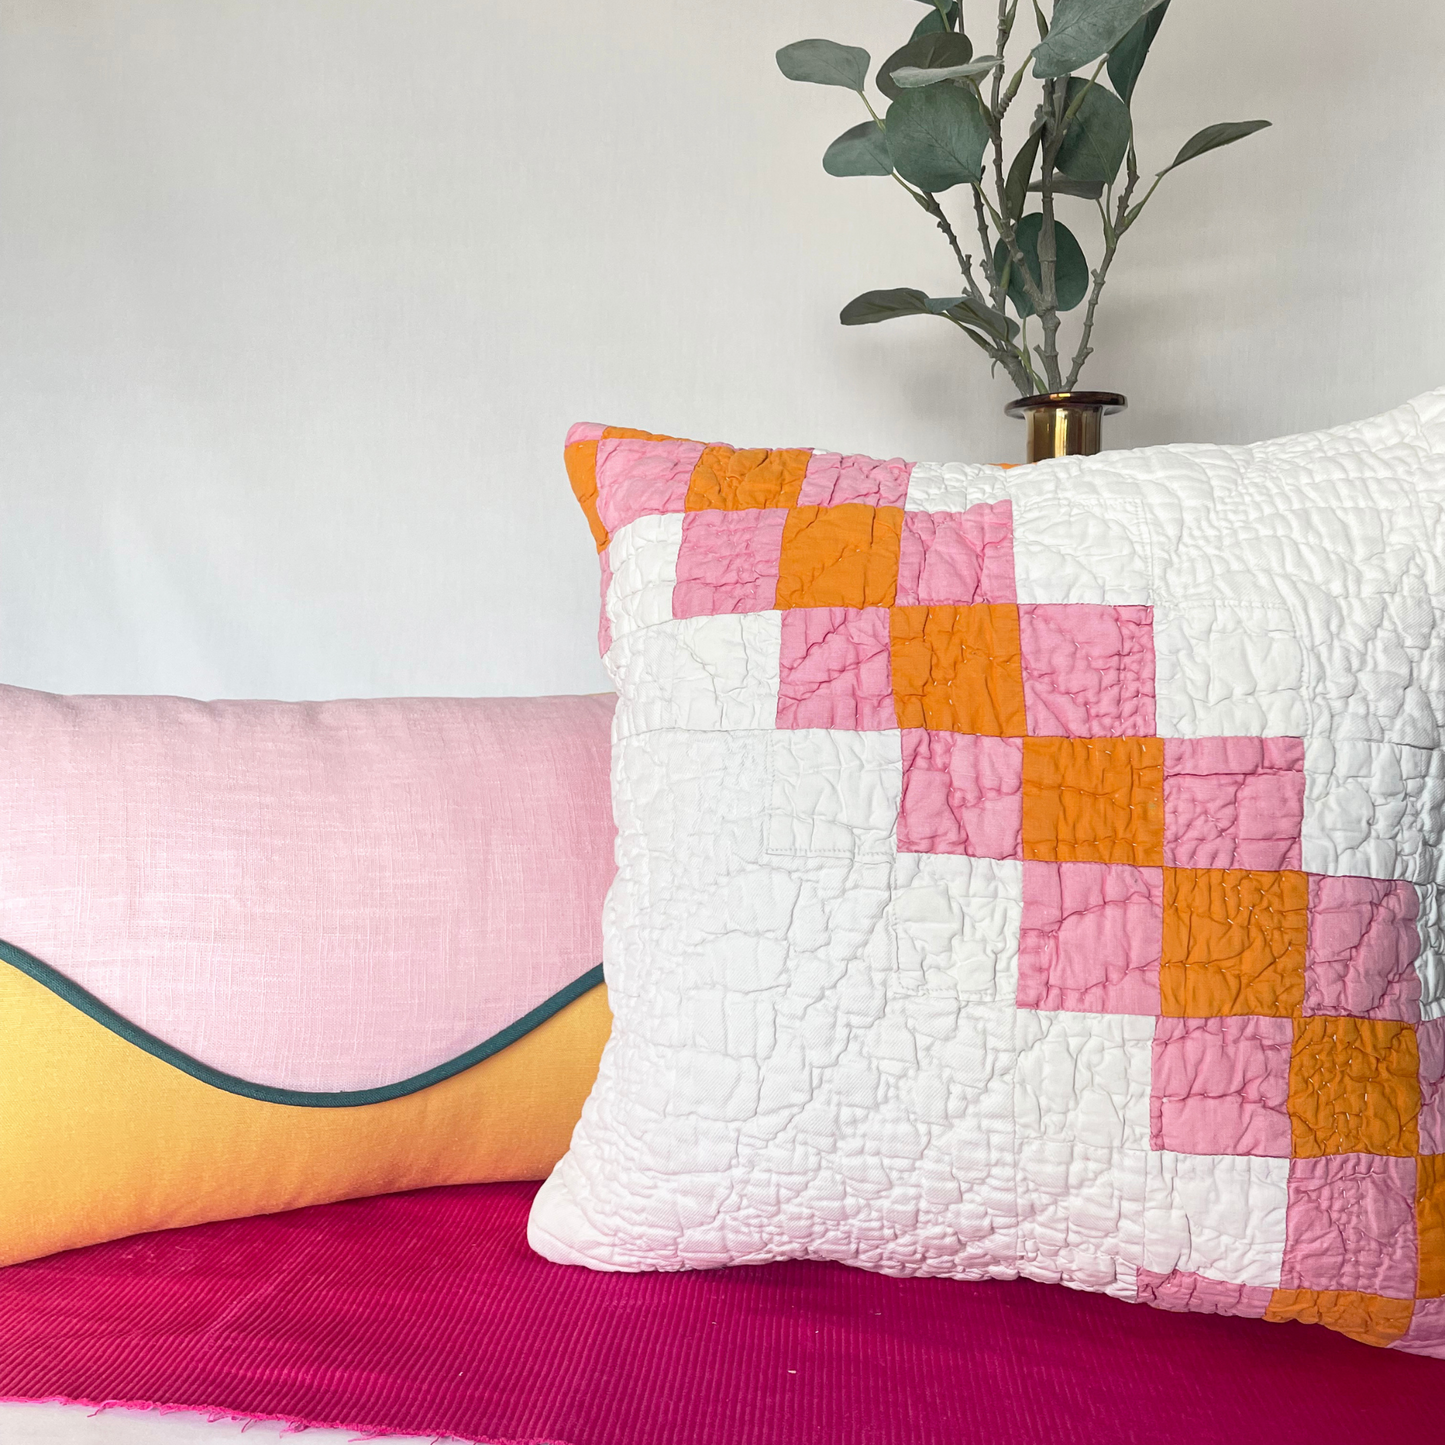 Orange & Pink Quilted Cushion